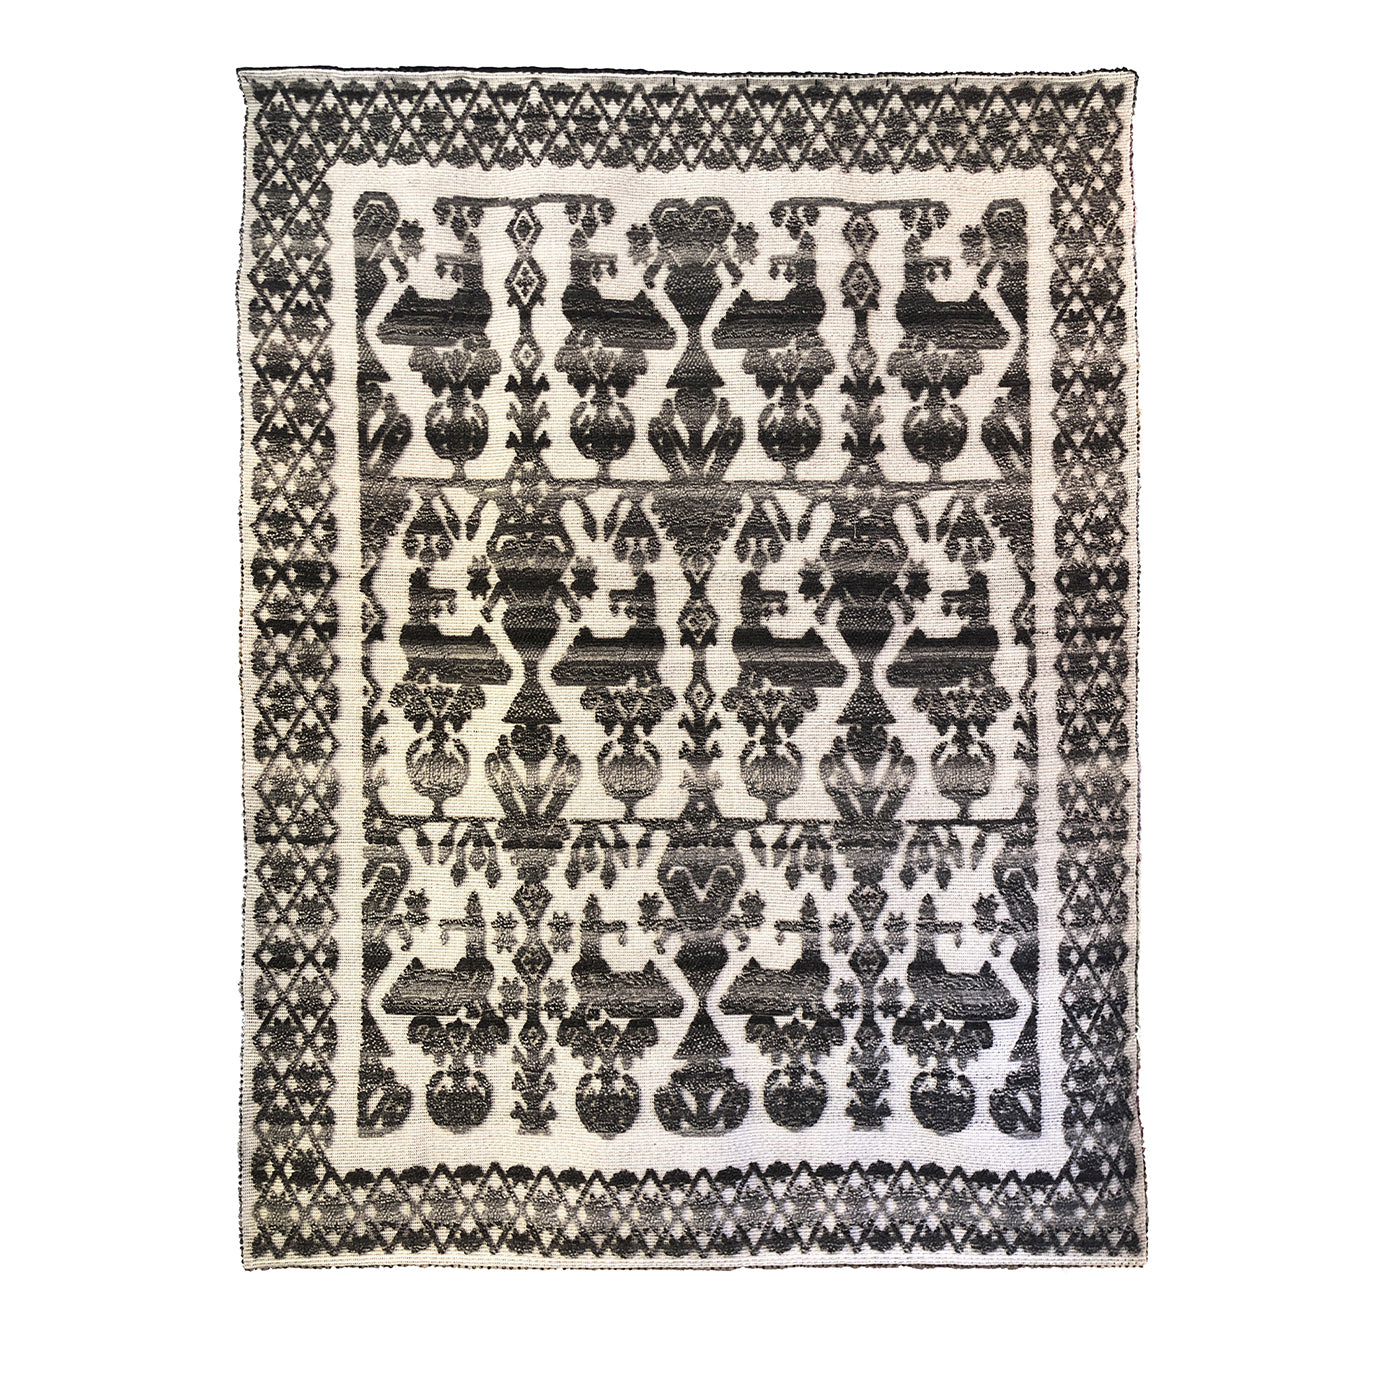 Uccello Fiorito Patterned Rug - Main view